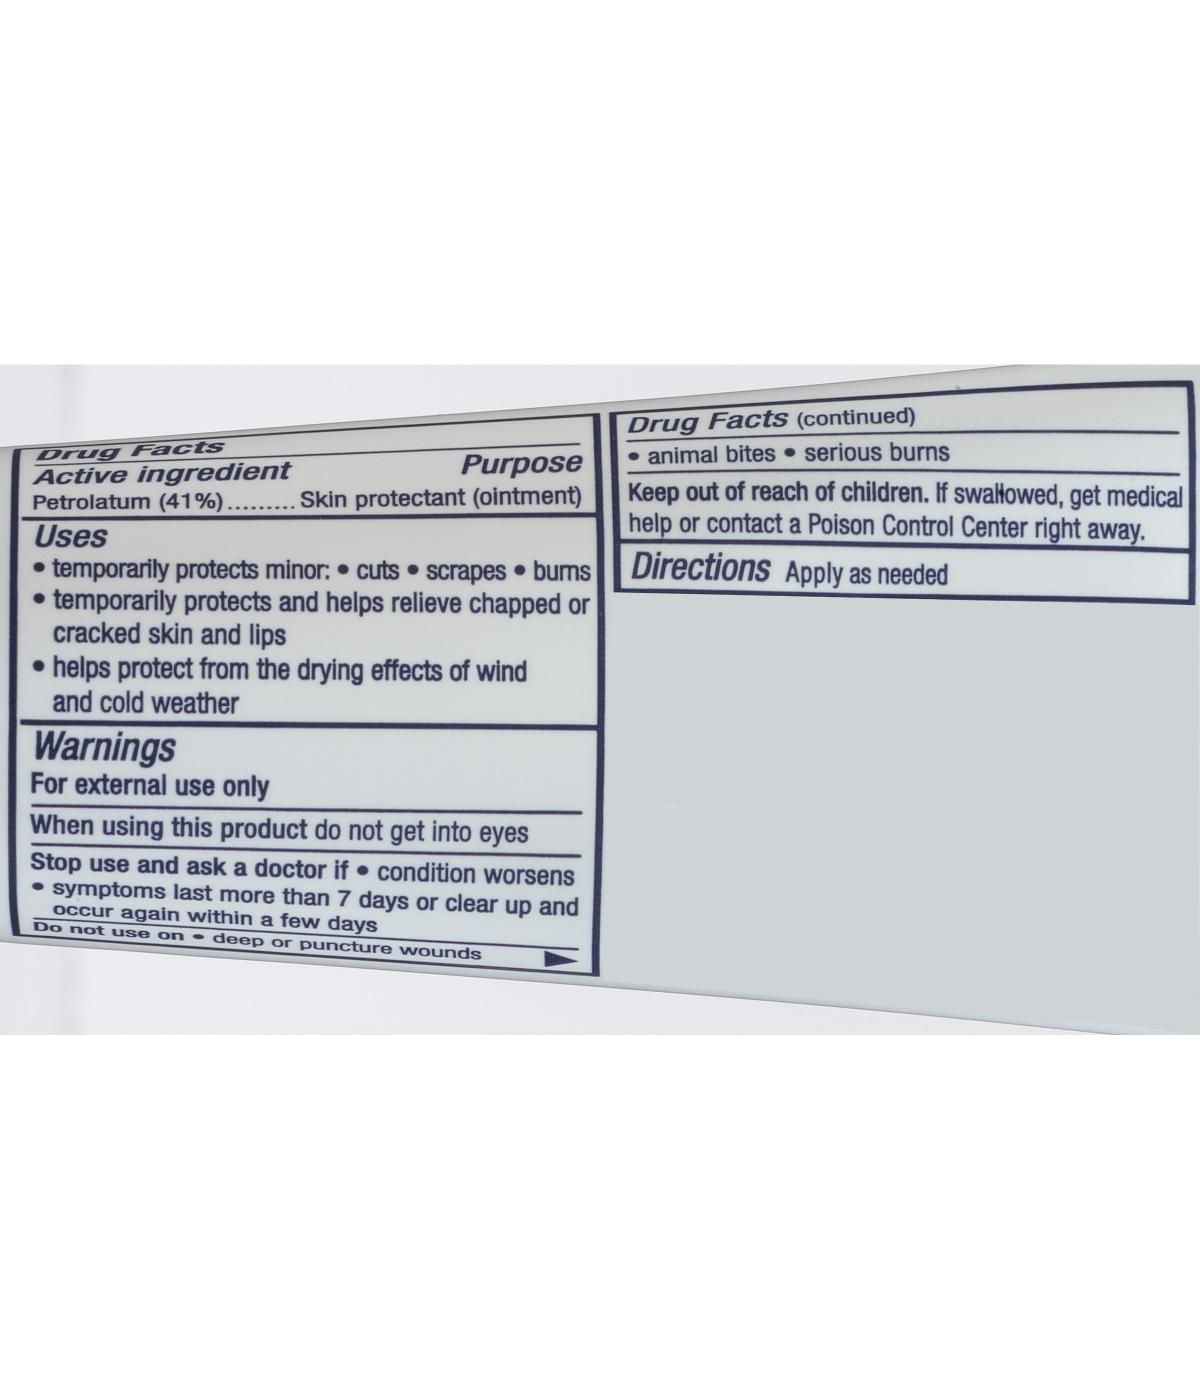 Aquaphor Advanced Therapy Healing Ointment Skin Protectant Tube; image 3 of 3